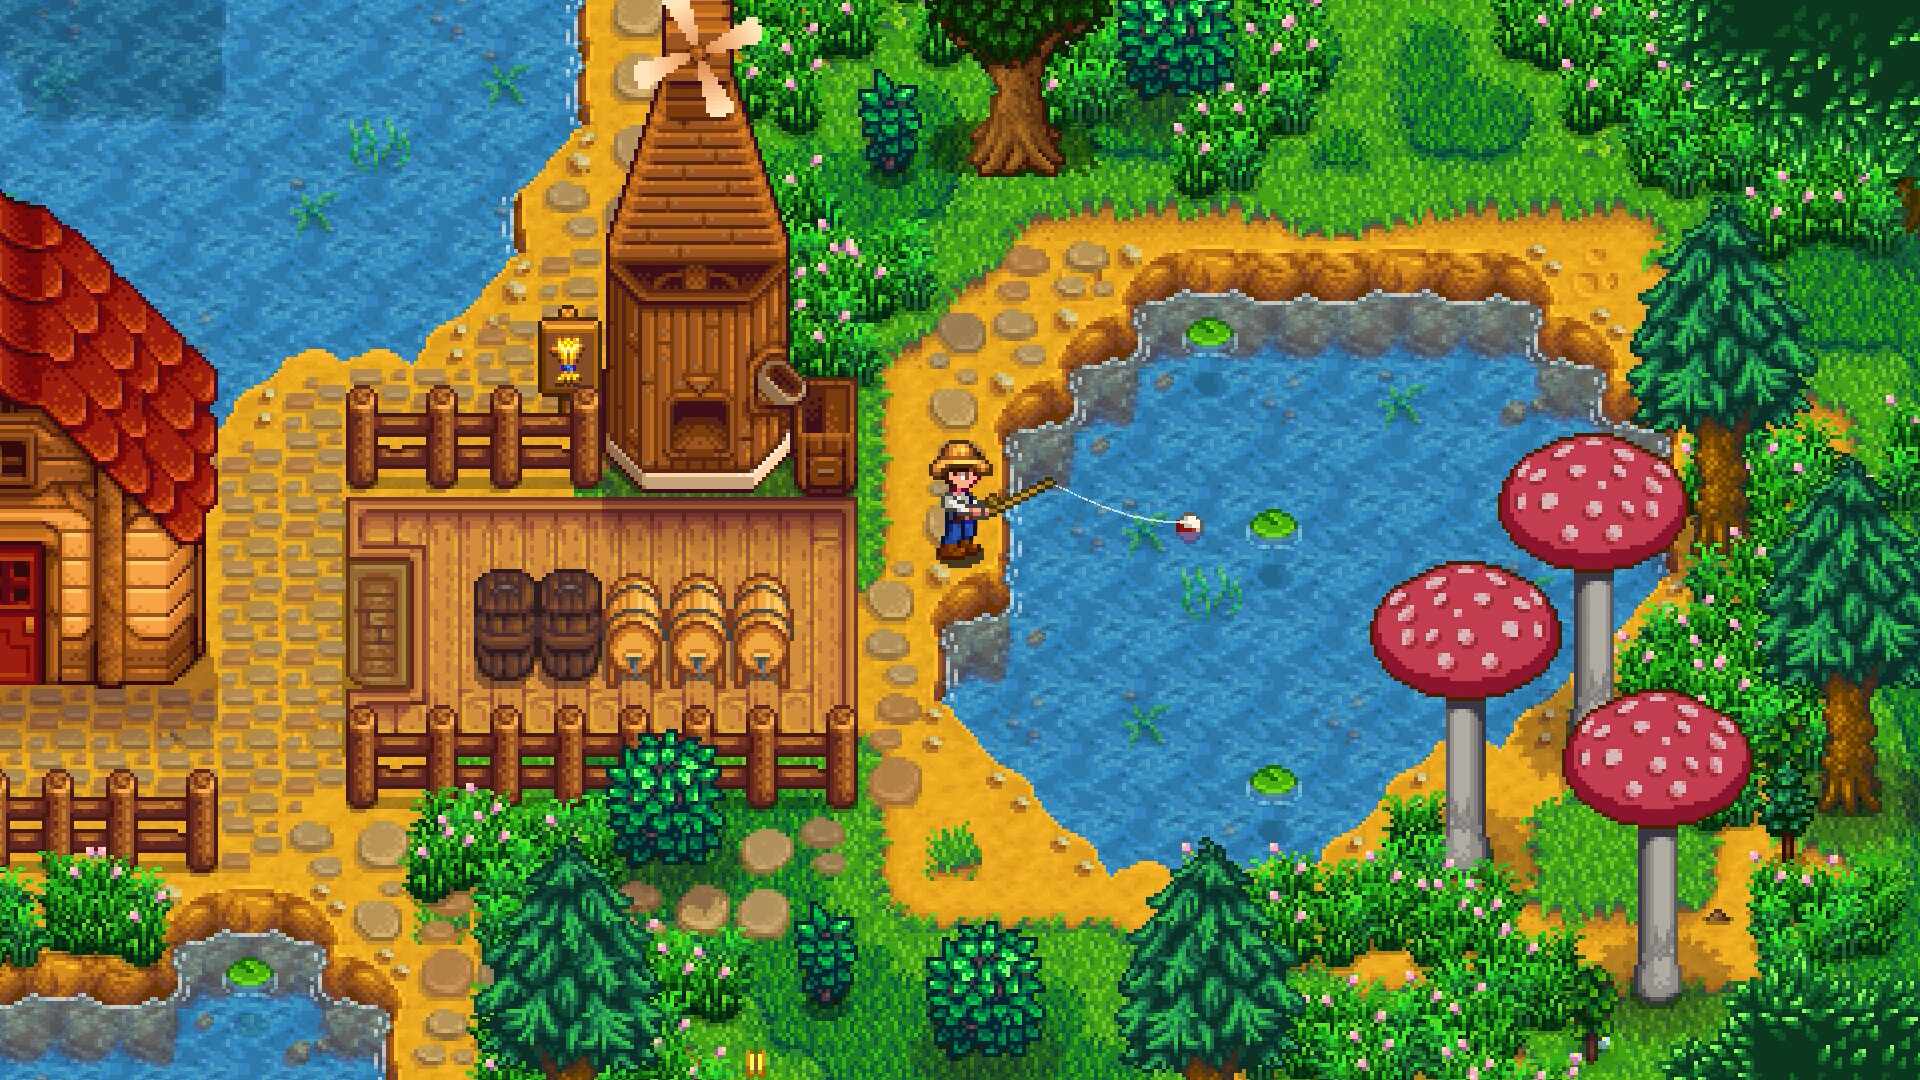 Stardew Valley features a wide variety of fun activities that you can enjoy at your own pace | Image Source: Steam